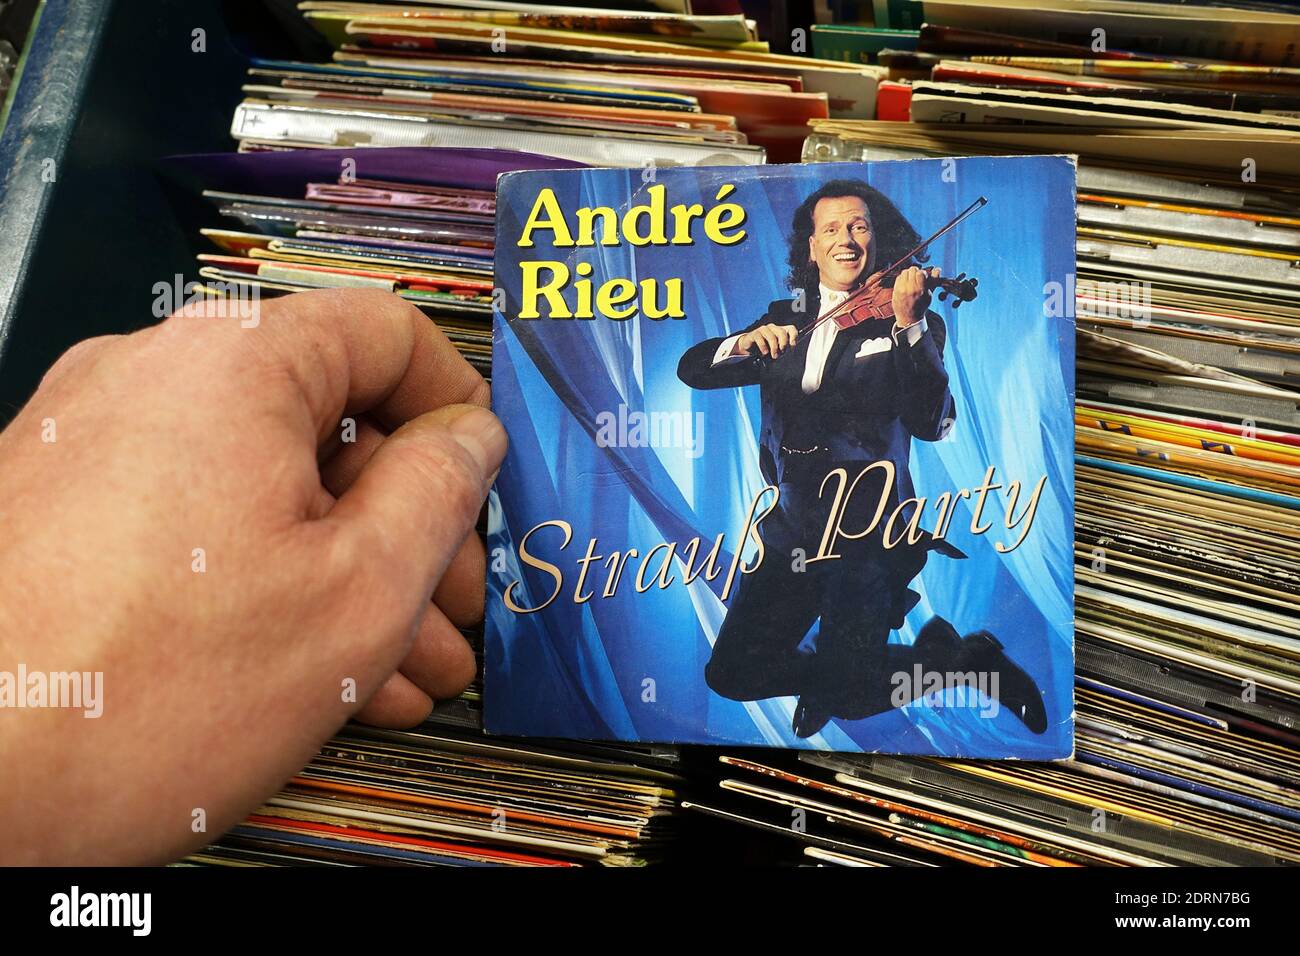 CD Single: André Rieu - Strauss Party Stock Photo